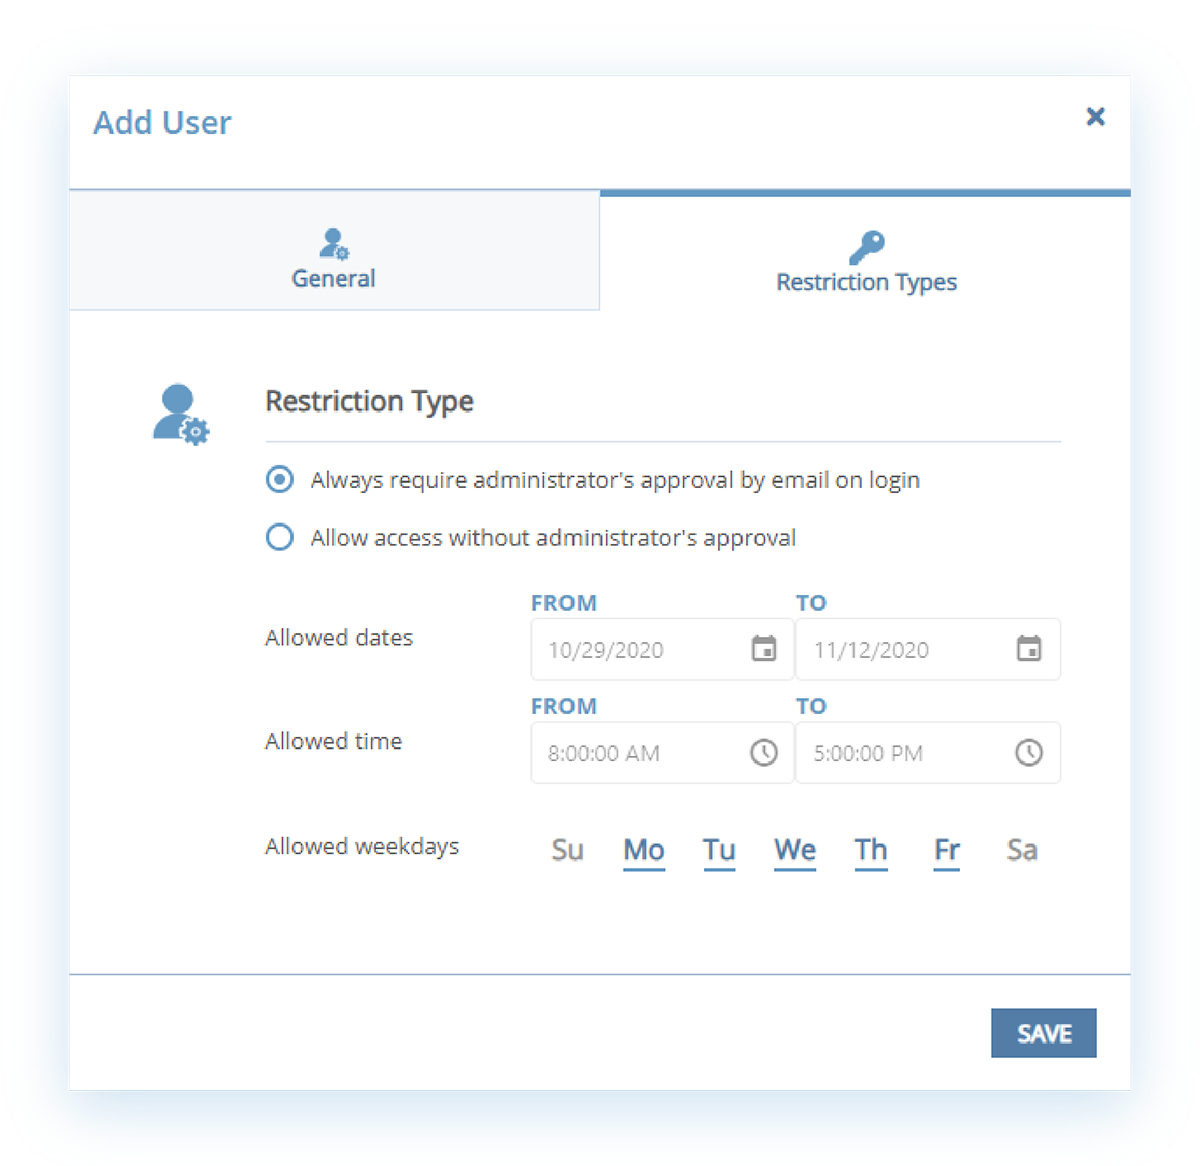 Ekran System Software - Control access to user accounts. Ekran System enables granular access management for both privileged and general user accounts.